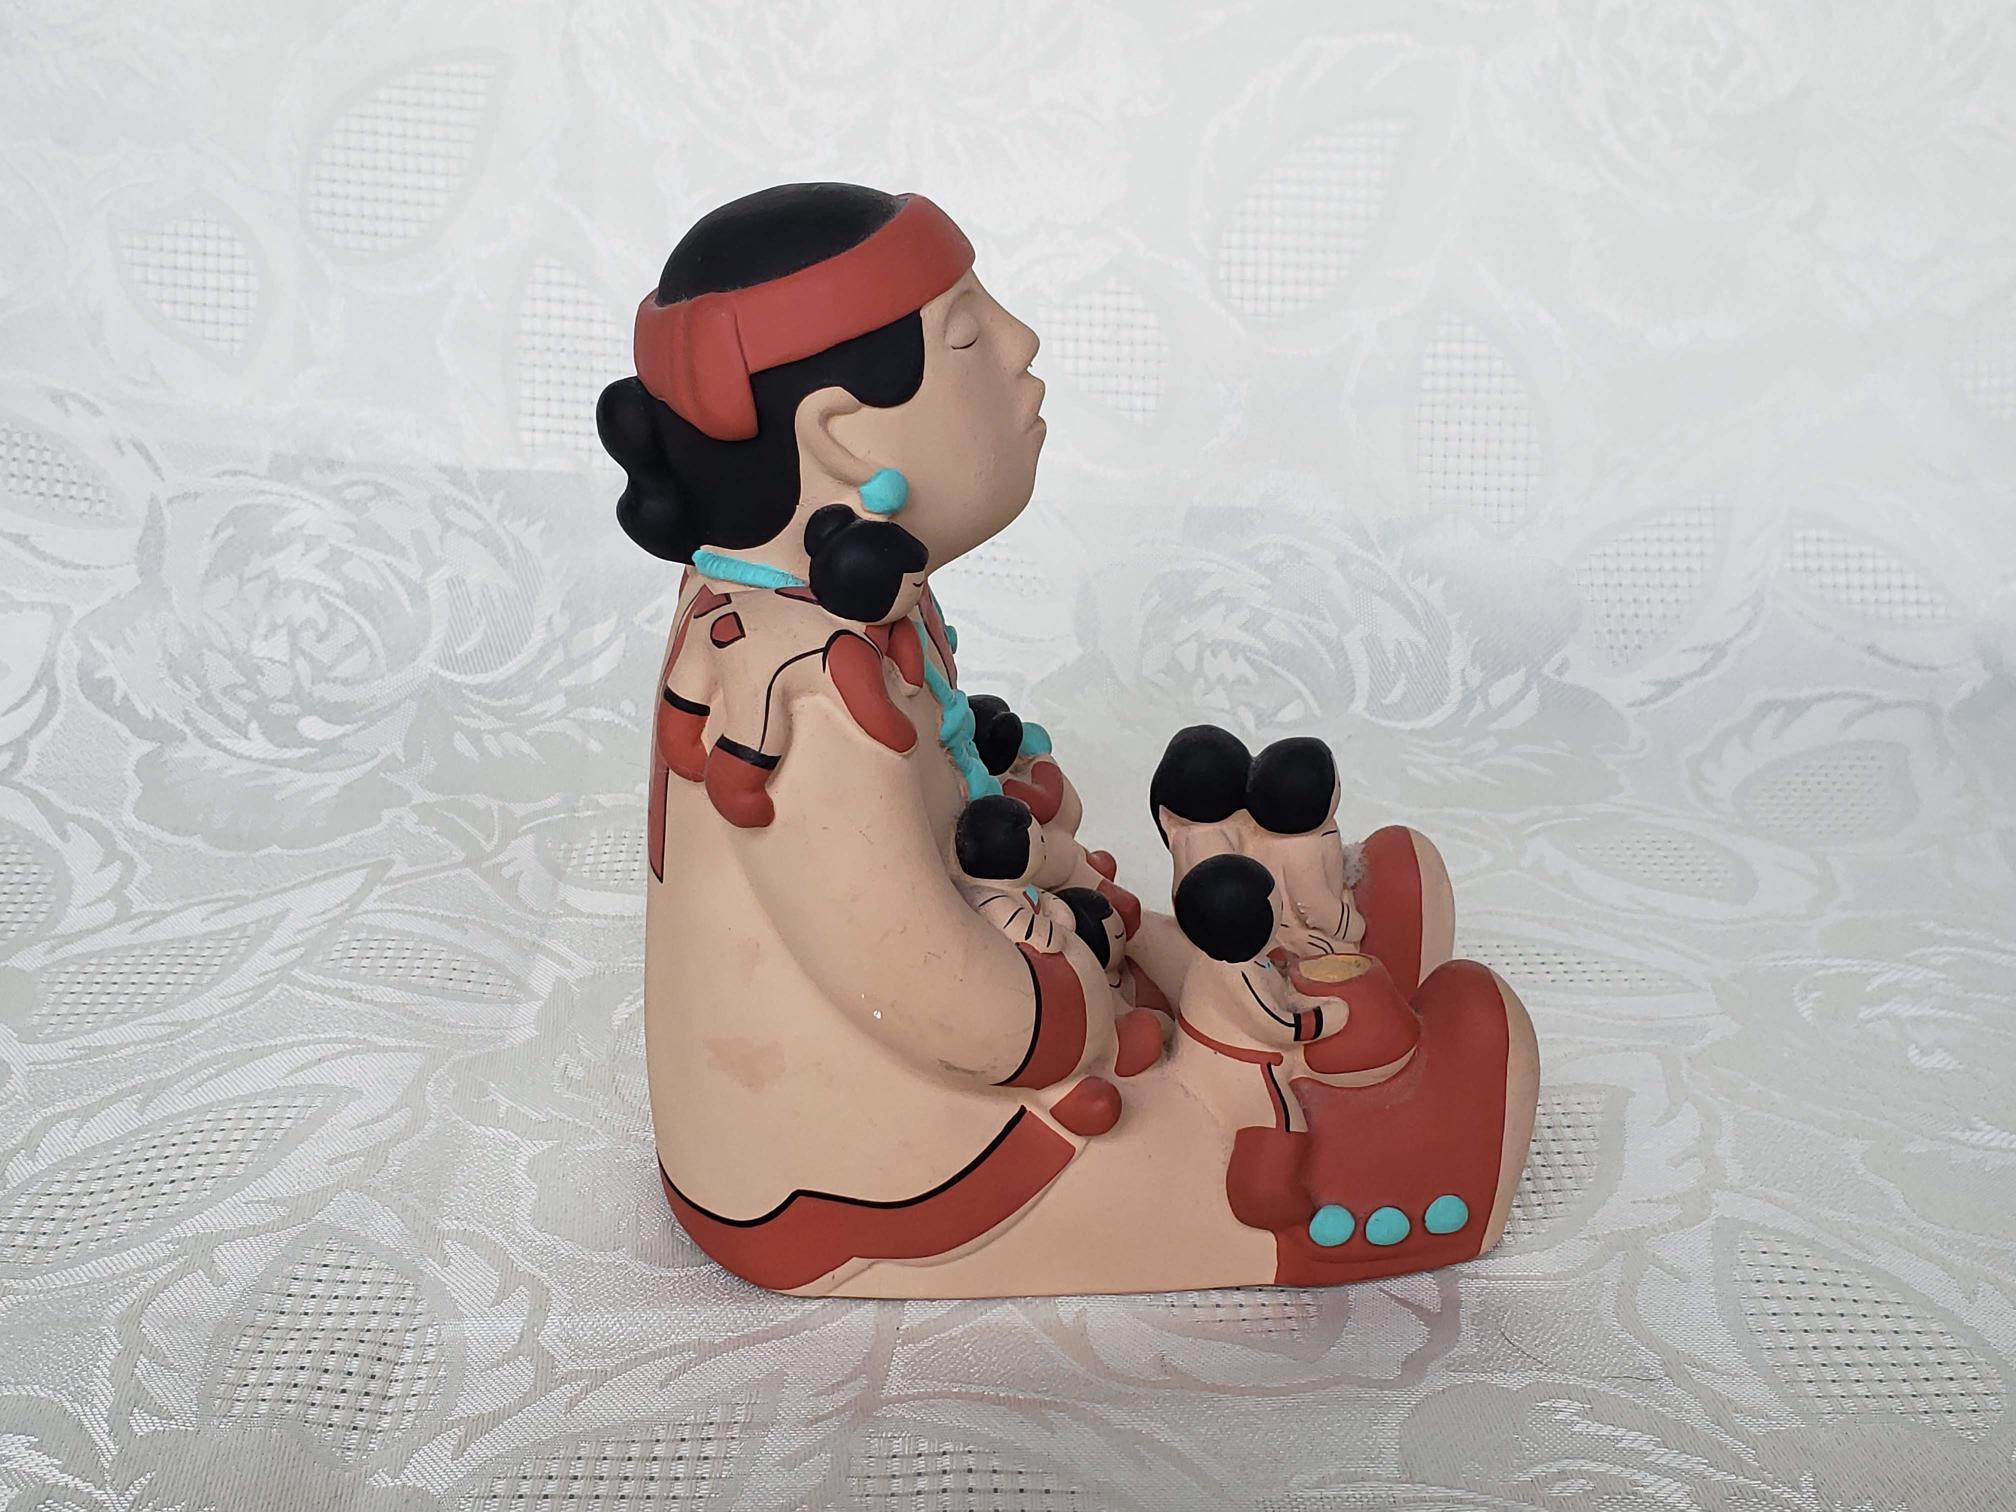 New Mexico Cleo Teissedre Southwestern Native American Storyteller Figurine ~ Free Shipping U.S.A ~ Signed Teissedre 86 Fine Tucson